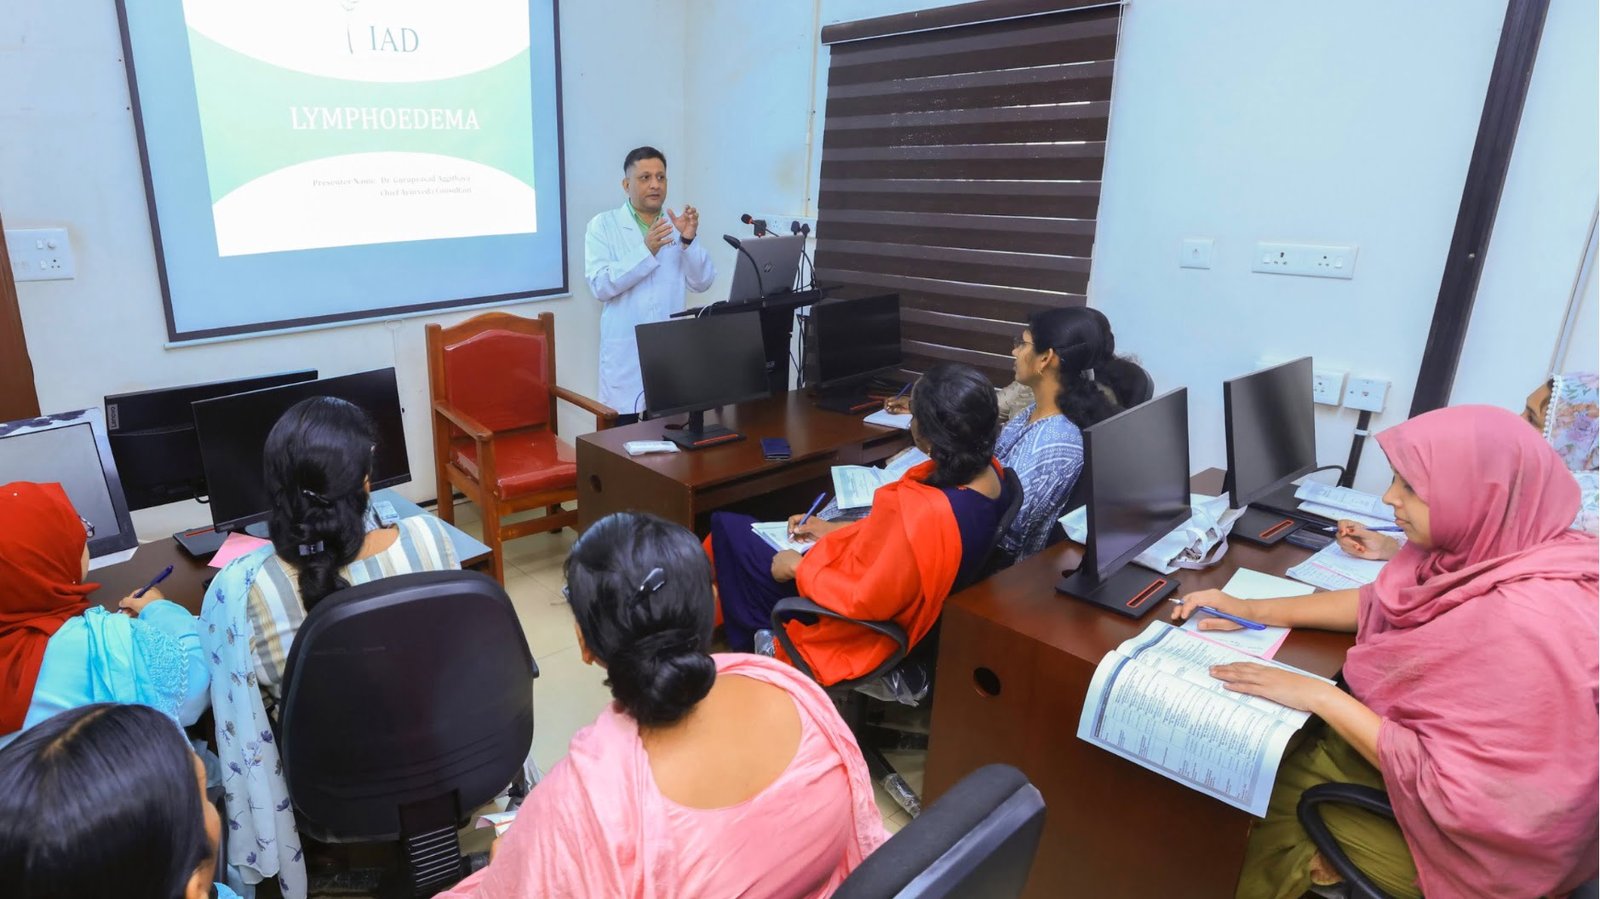 A training programme at the campus of Institute of Applied Dermatology in Kasargod, Kerala.